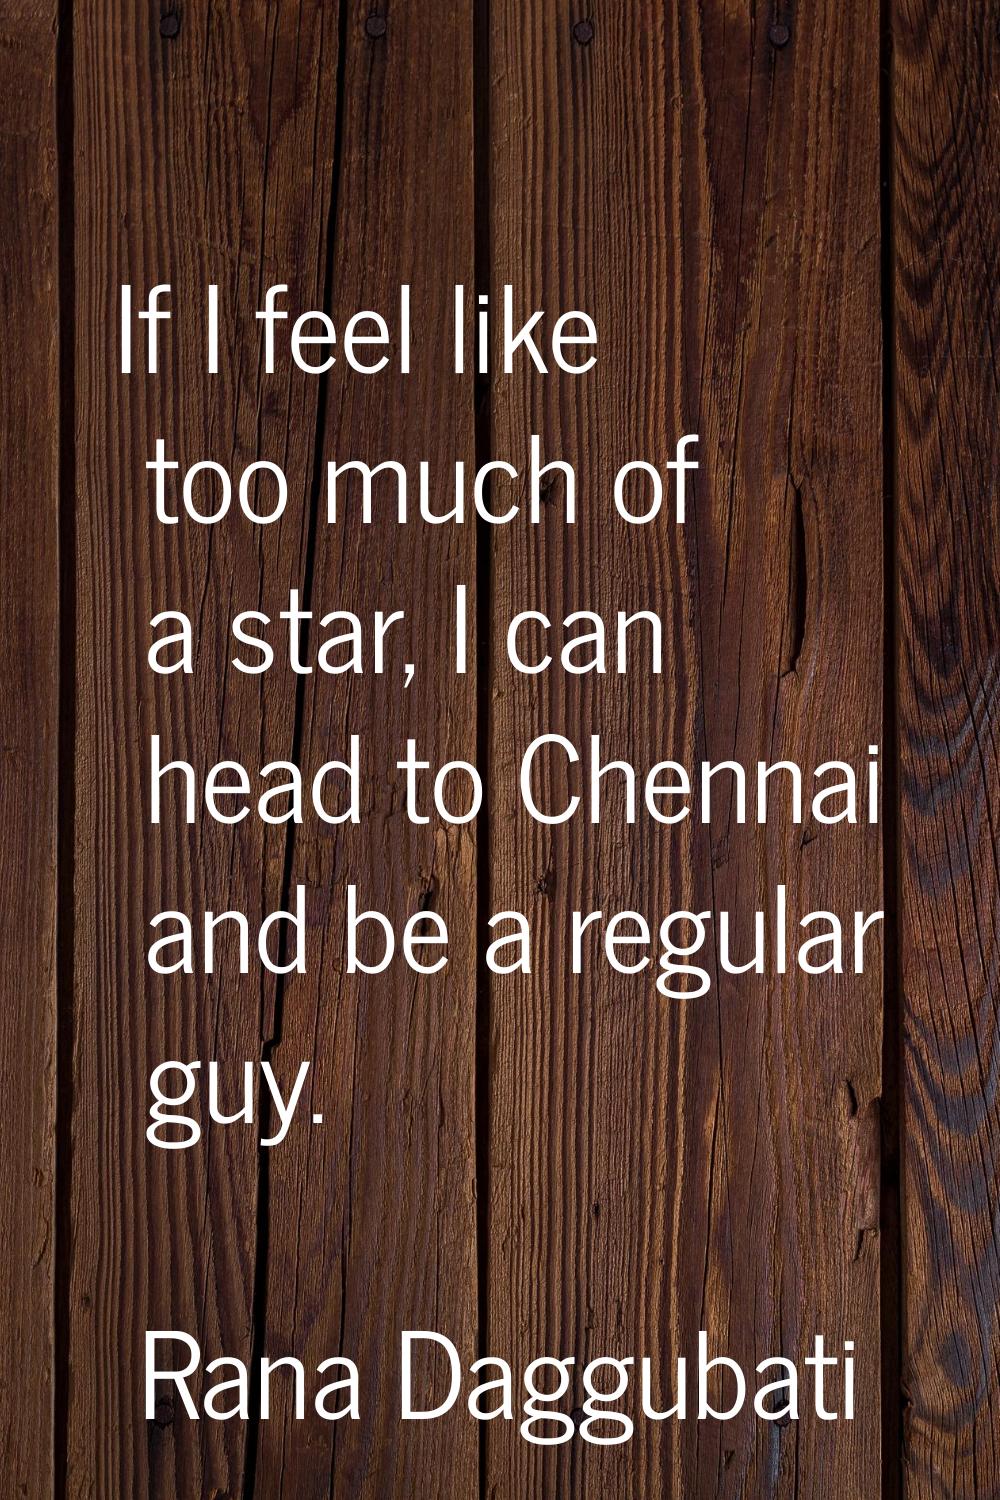 If I feel like too much of a star, I can head to Chennai and be a regular guy.